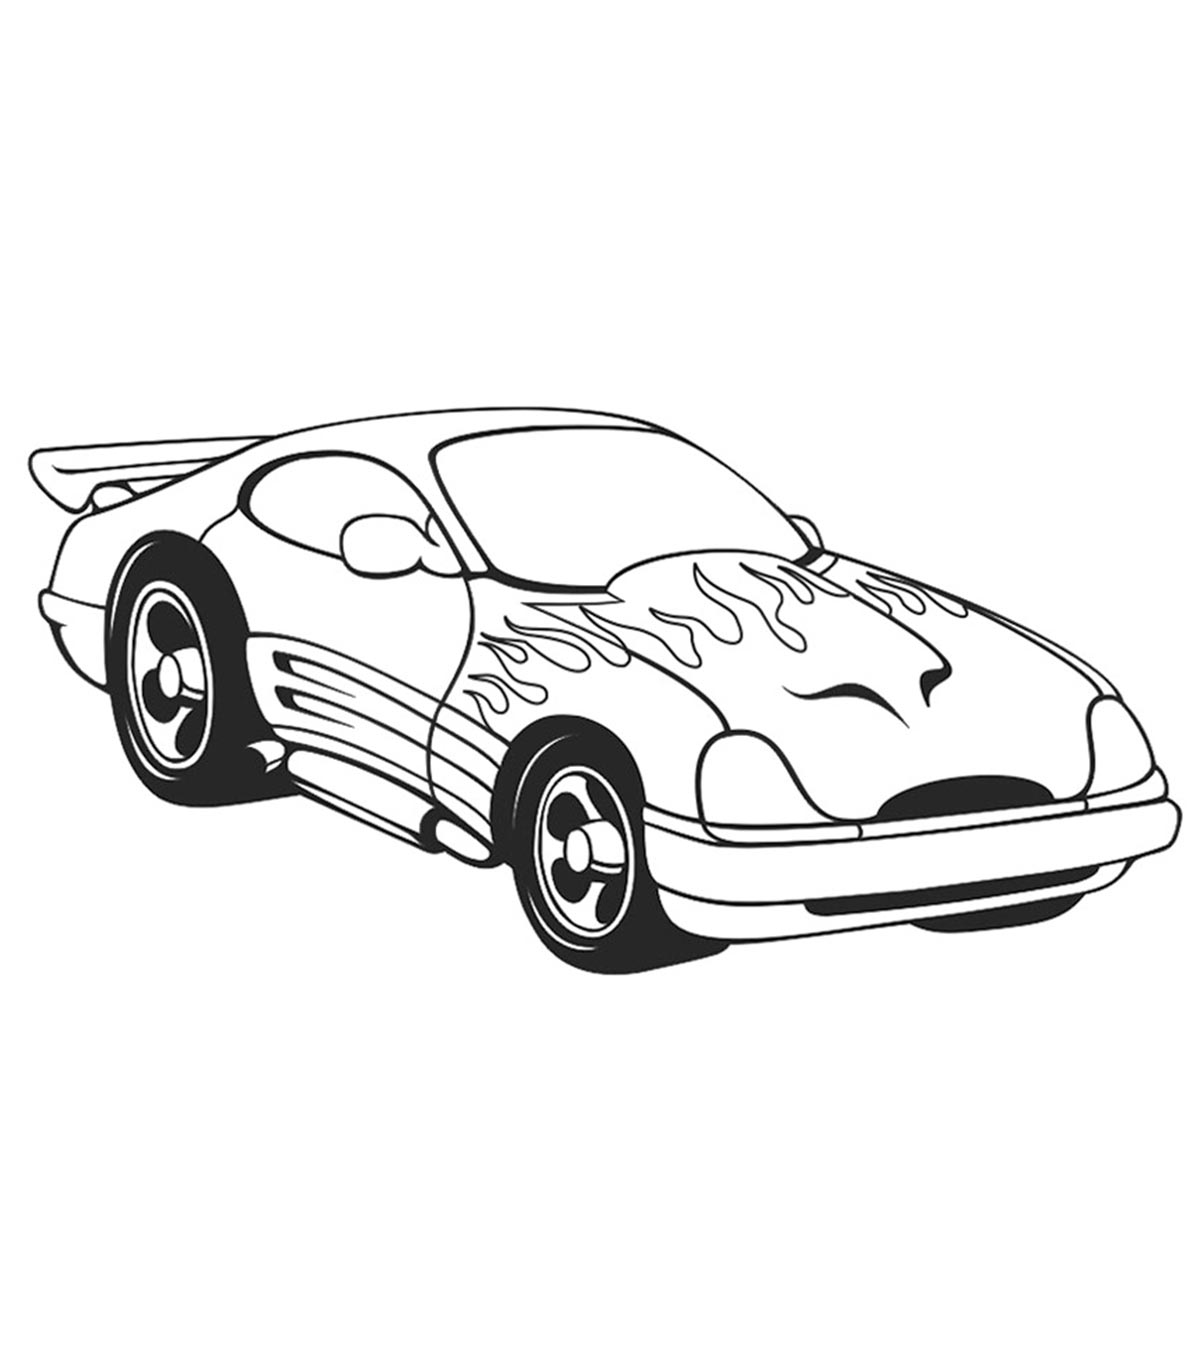 20 Interesting Sports Car Coloring Pages For Your Sports Lover Kids